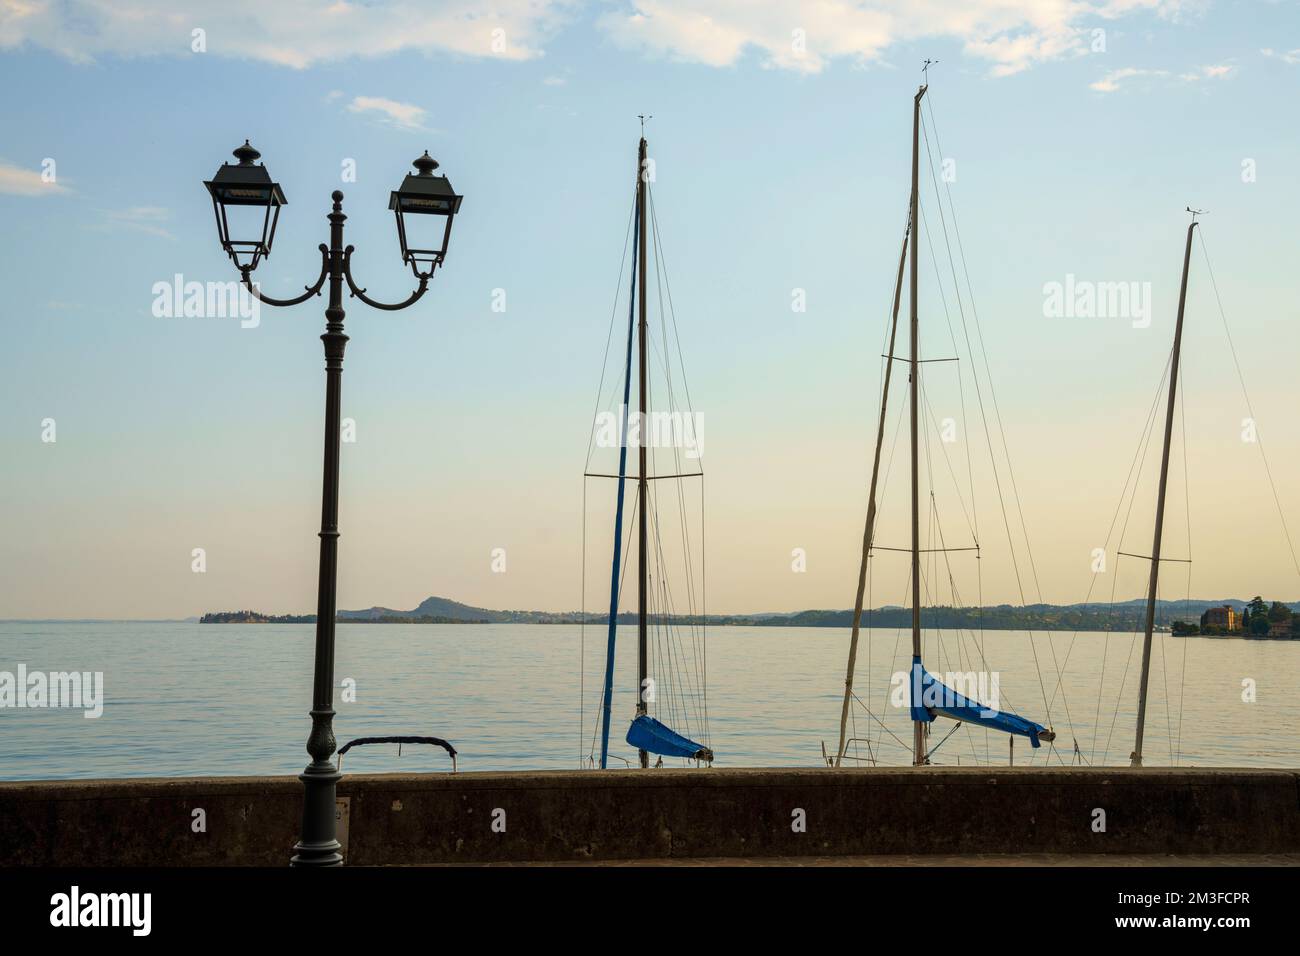 Garda lake at Toscolano Maderno, Brescia province, Lombardy, Italy, in a summer evening Stock Photo